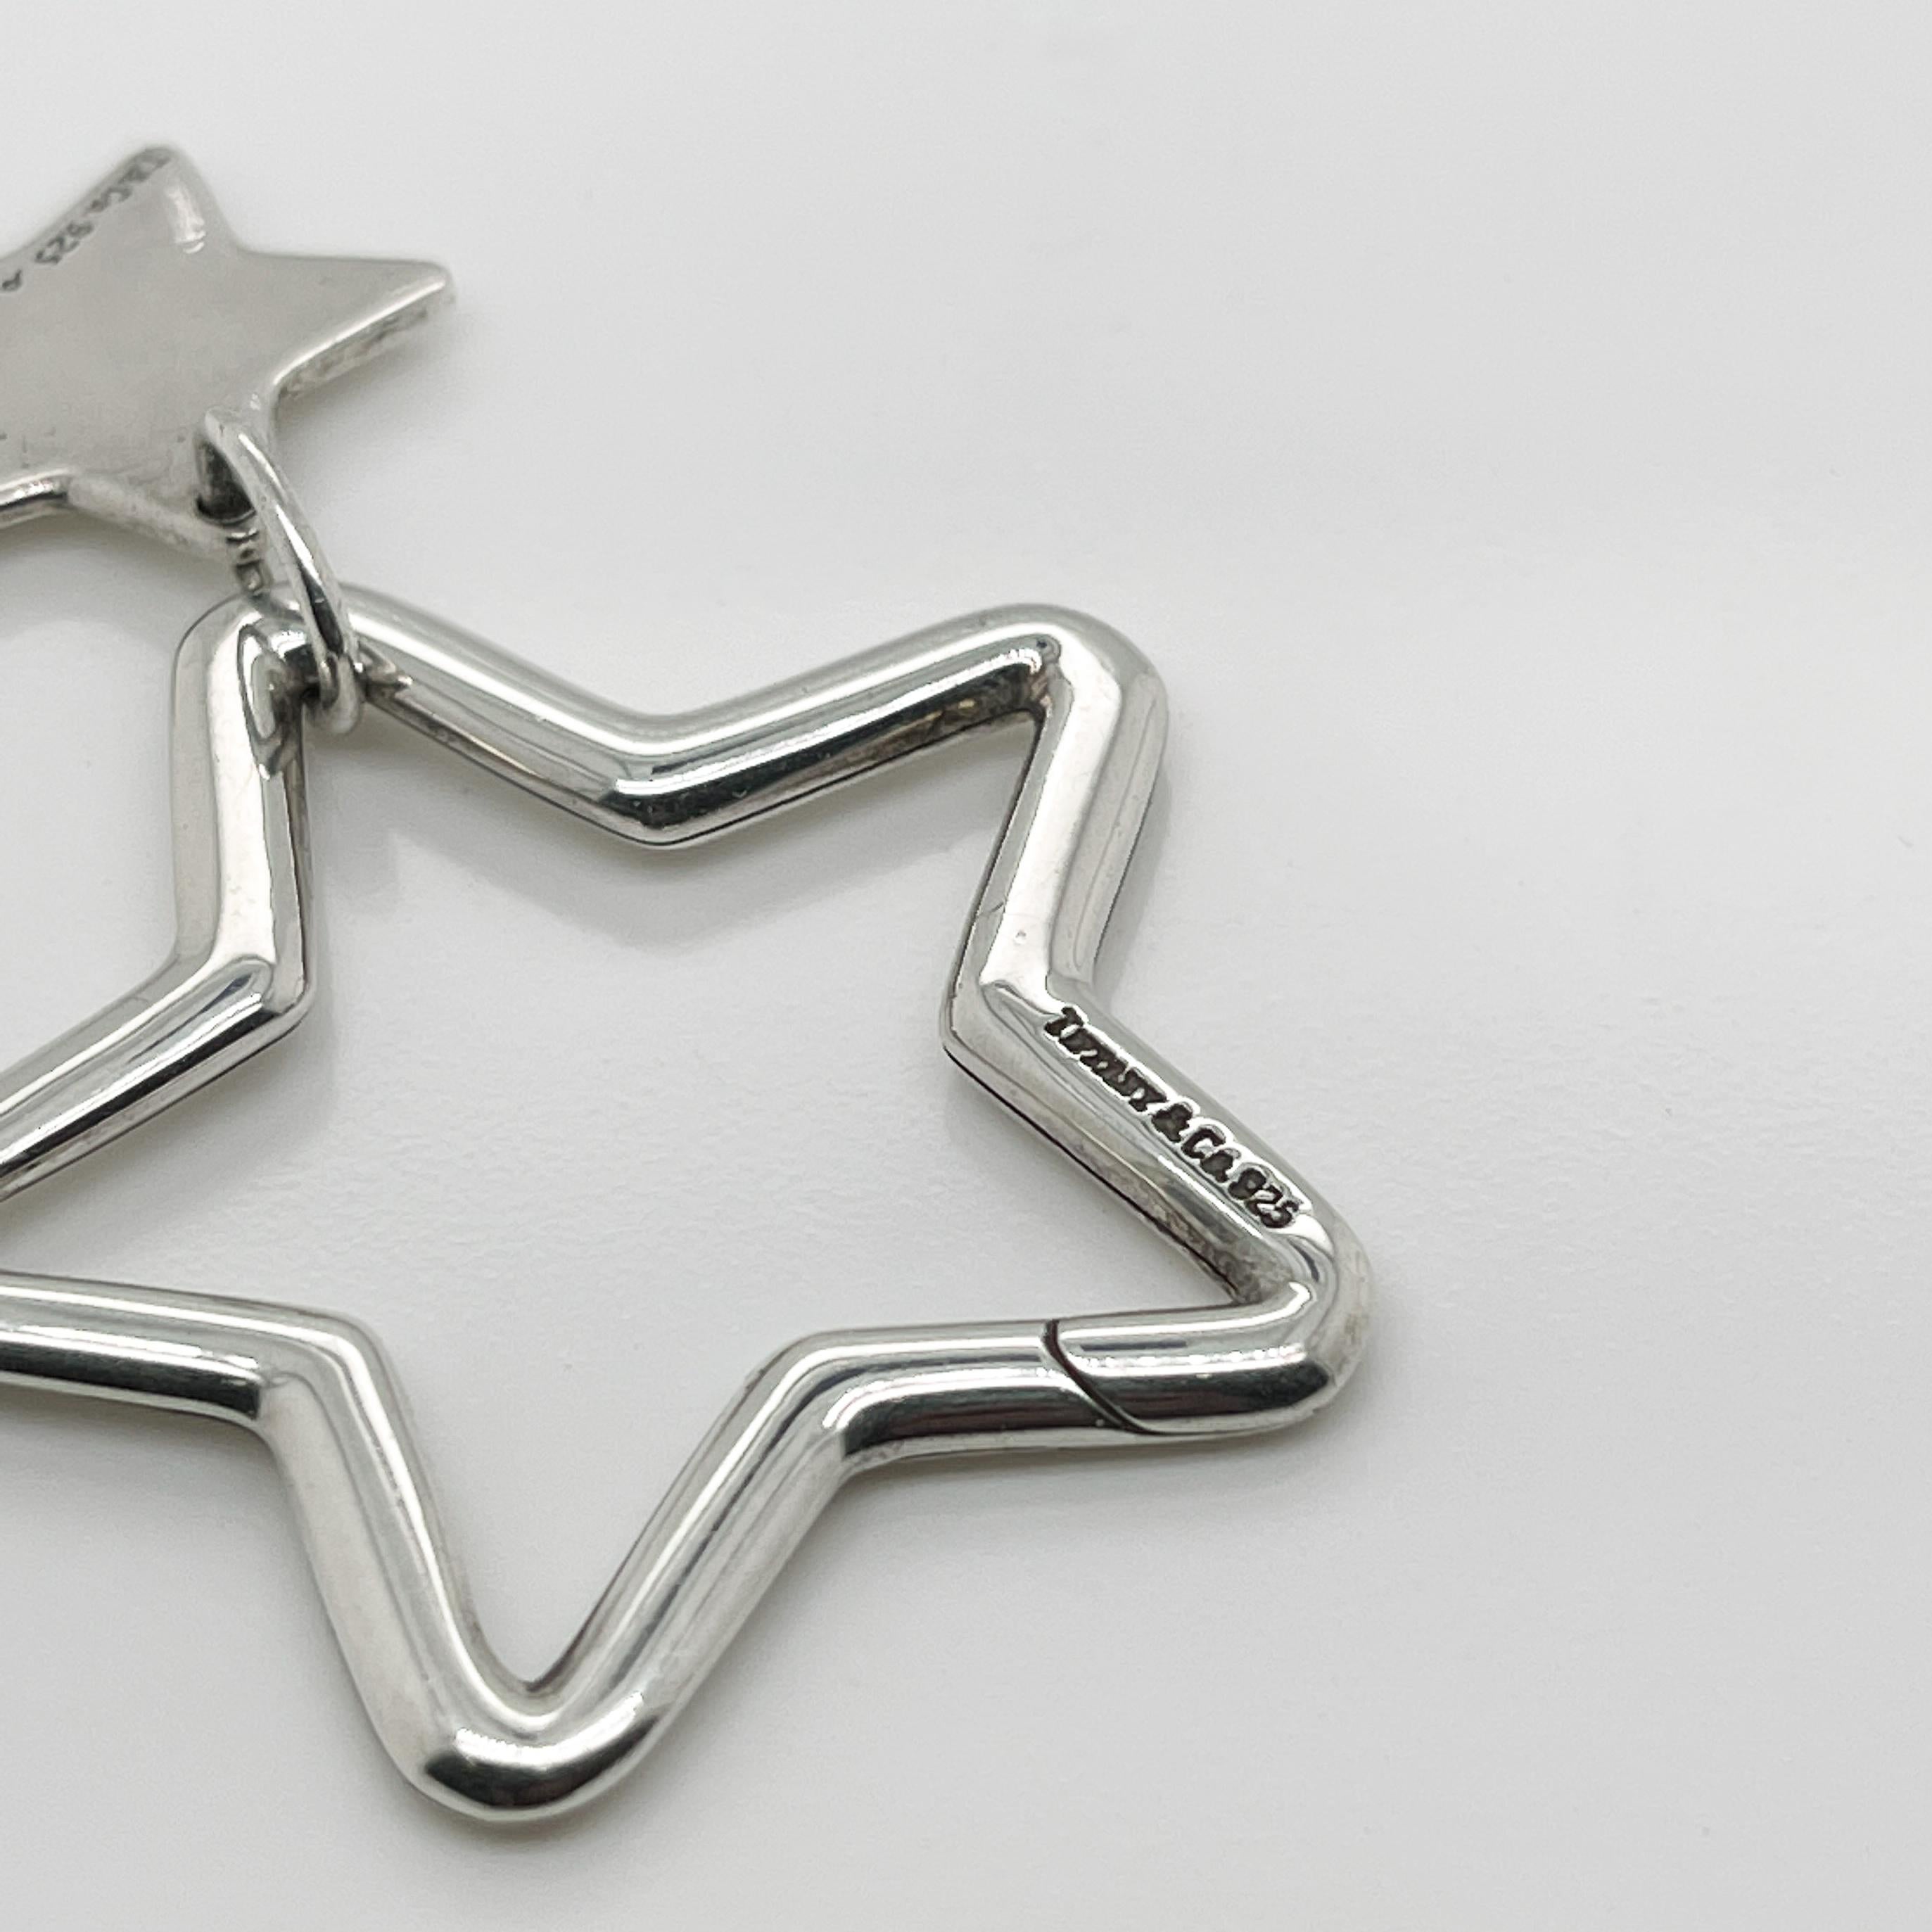 Vintage Tiffany & Co. Sterling Silver Double Star Key Holder For Sale 1